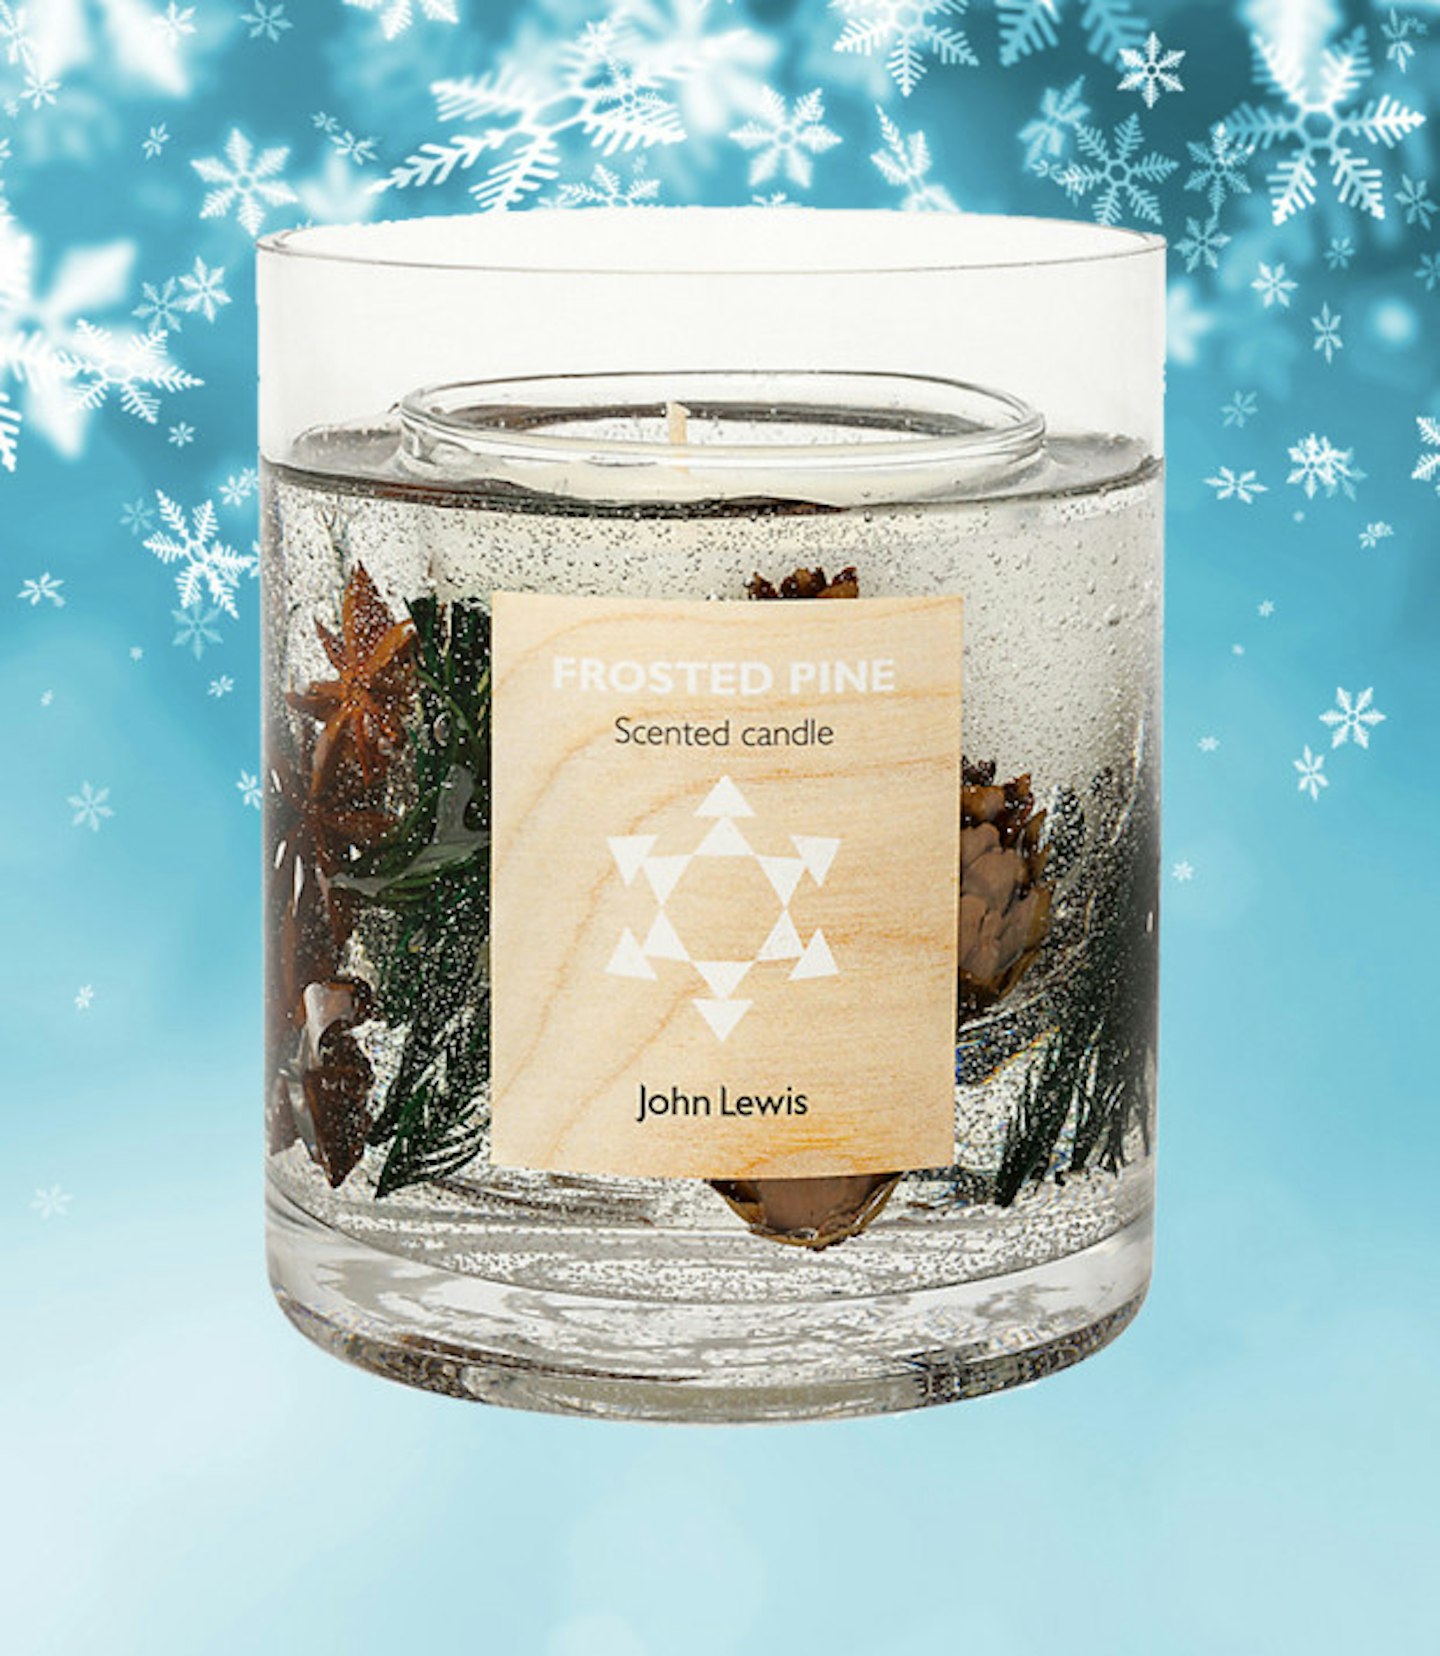 christmas-candles-john-lewis-frosted-pine-scented-candle